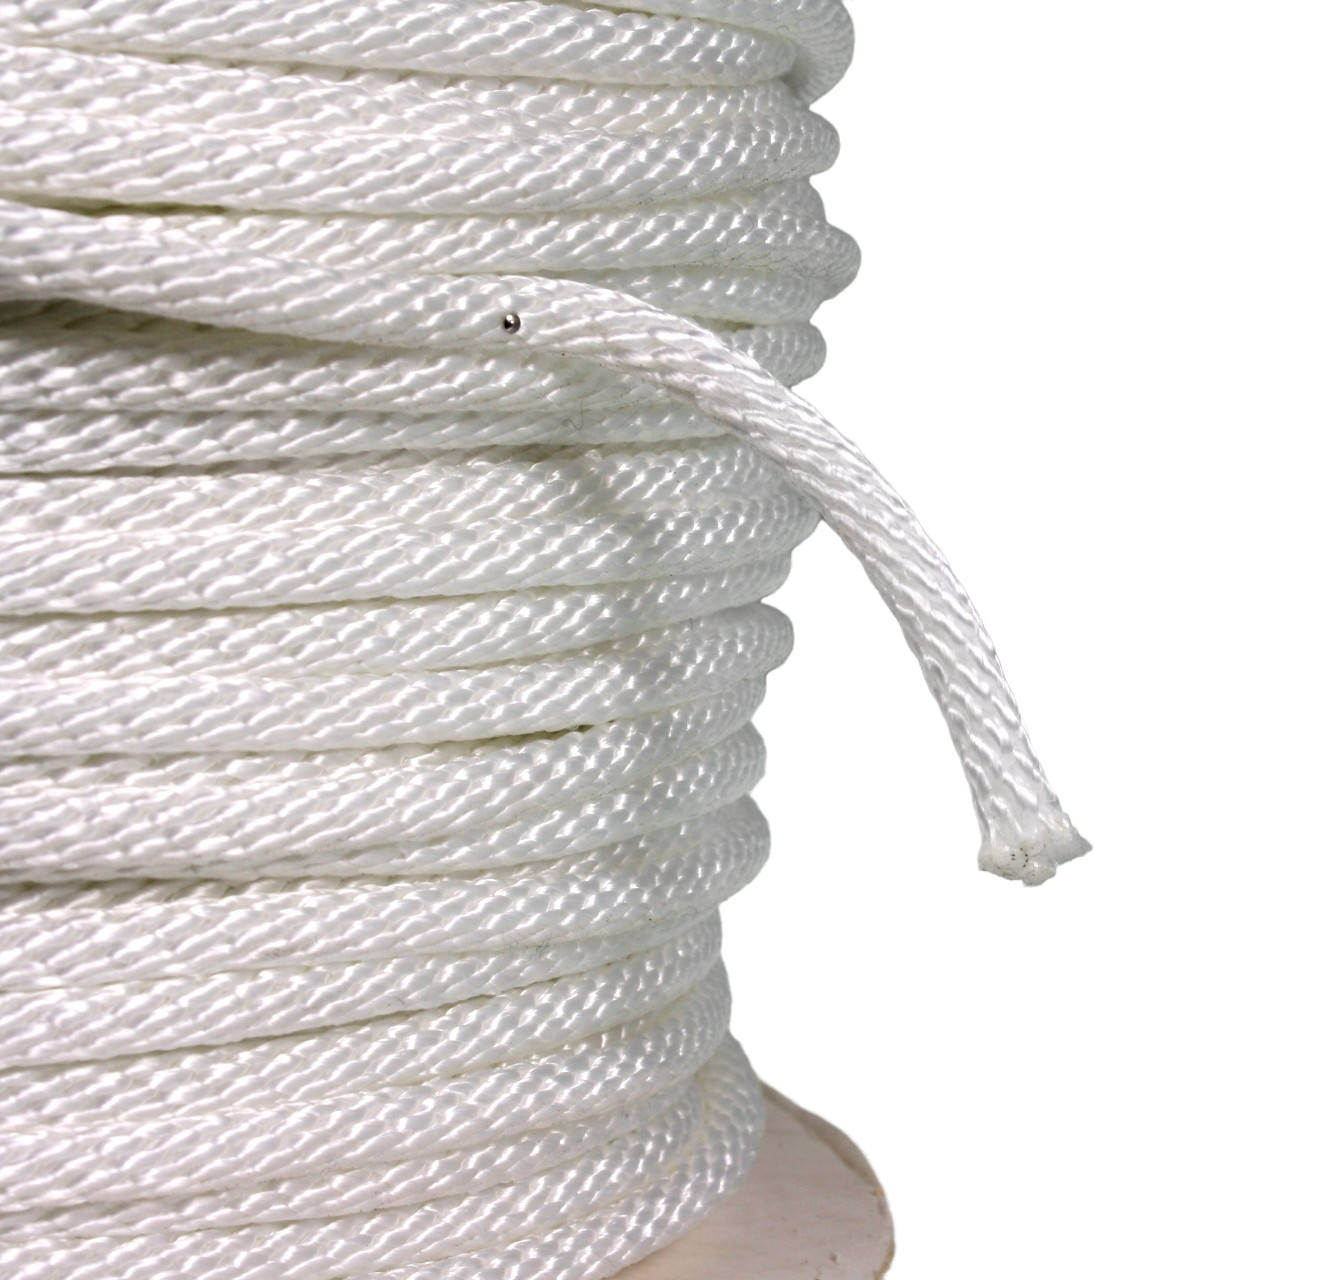 End of a roll of white sash cord, showing that the tail of it has been burned to seal the fibres.